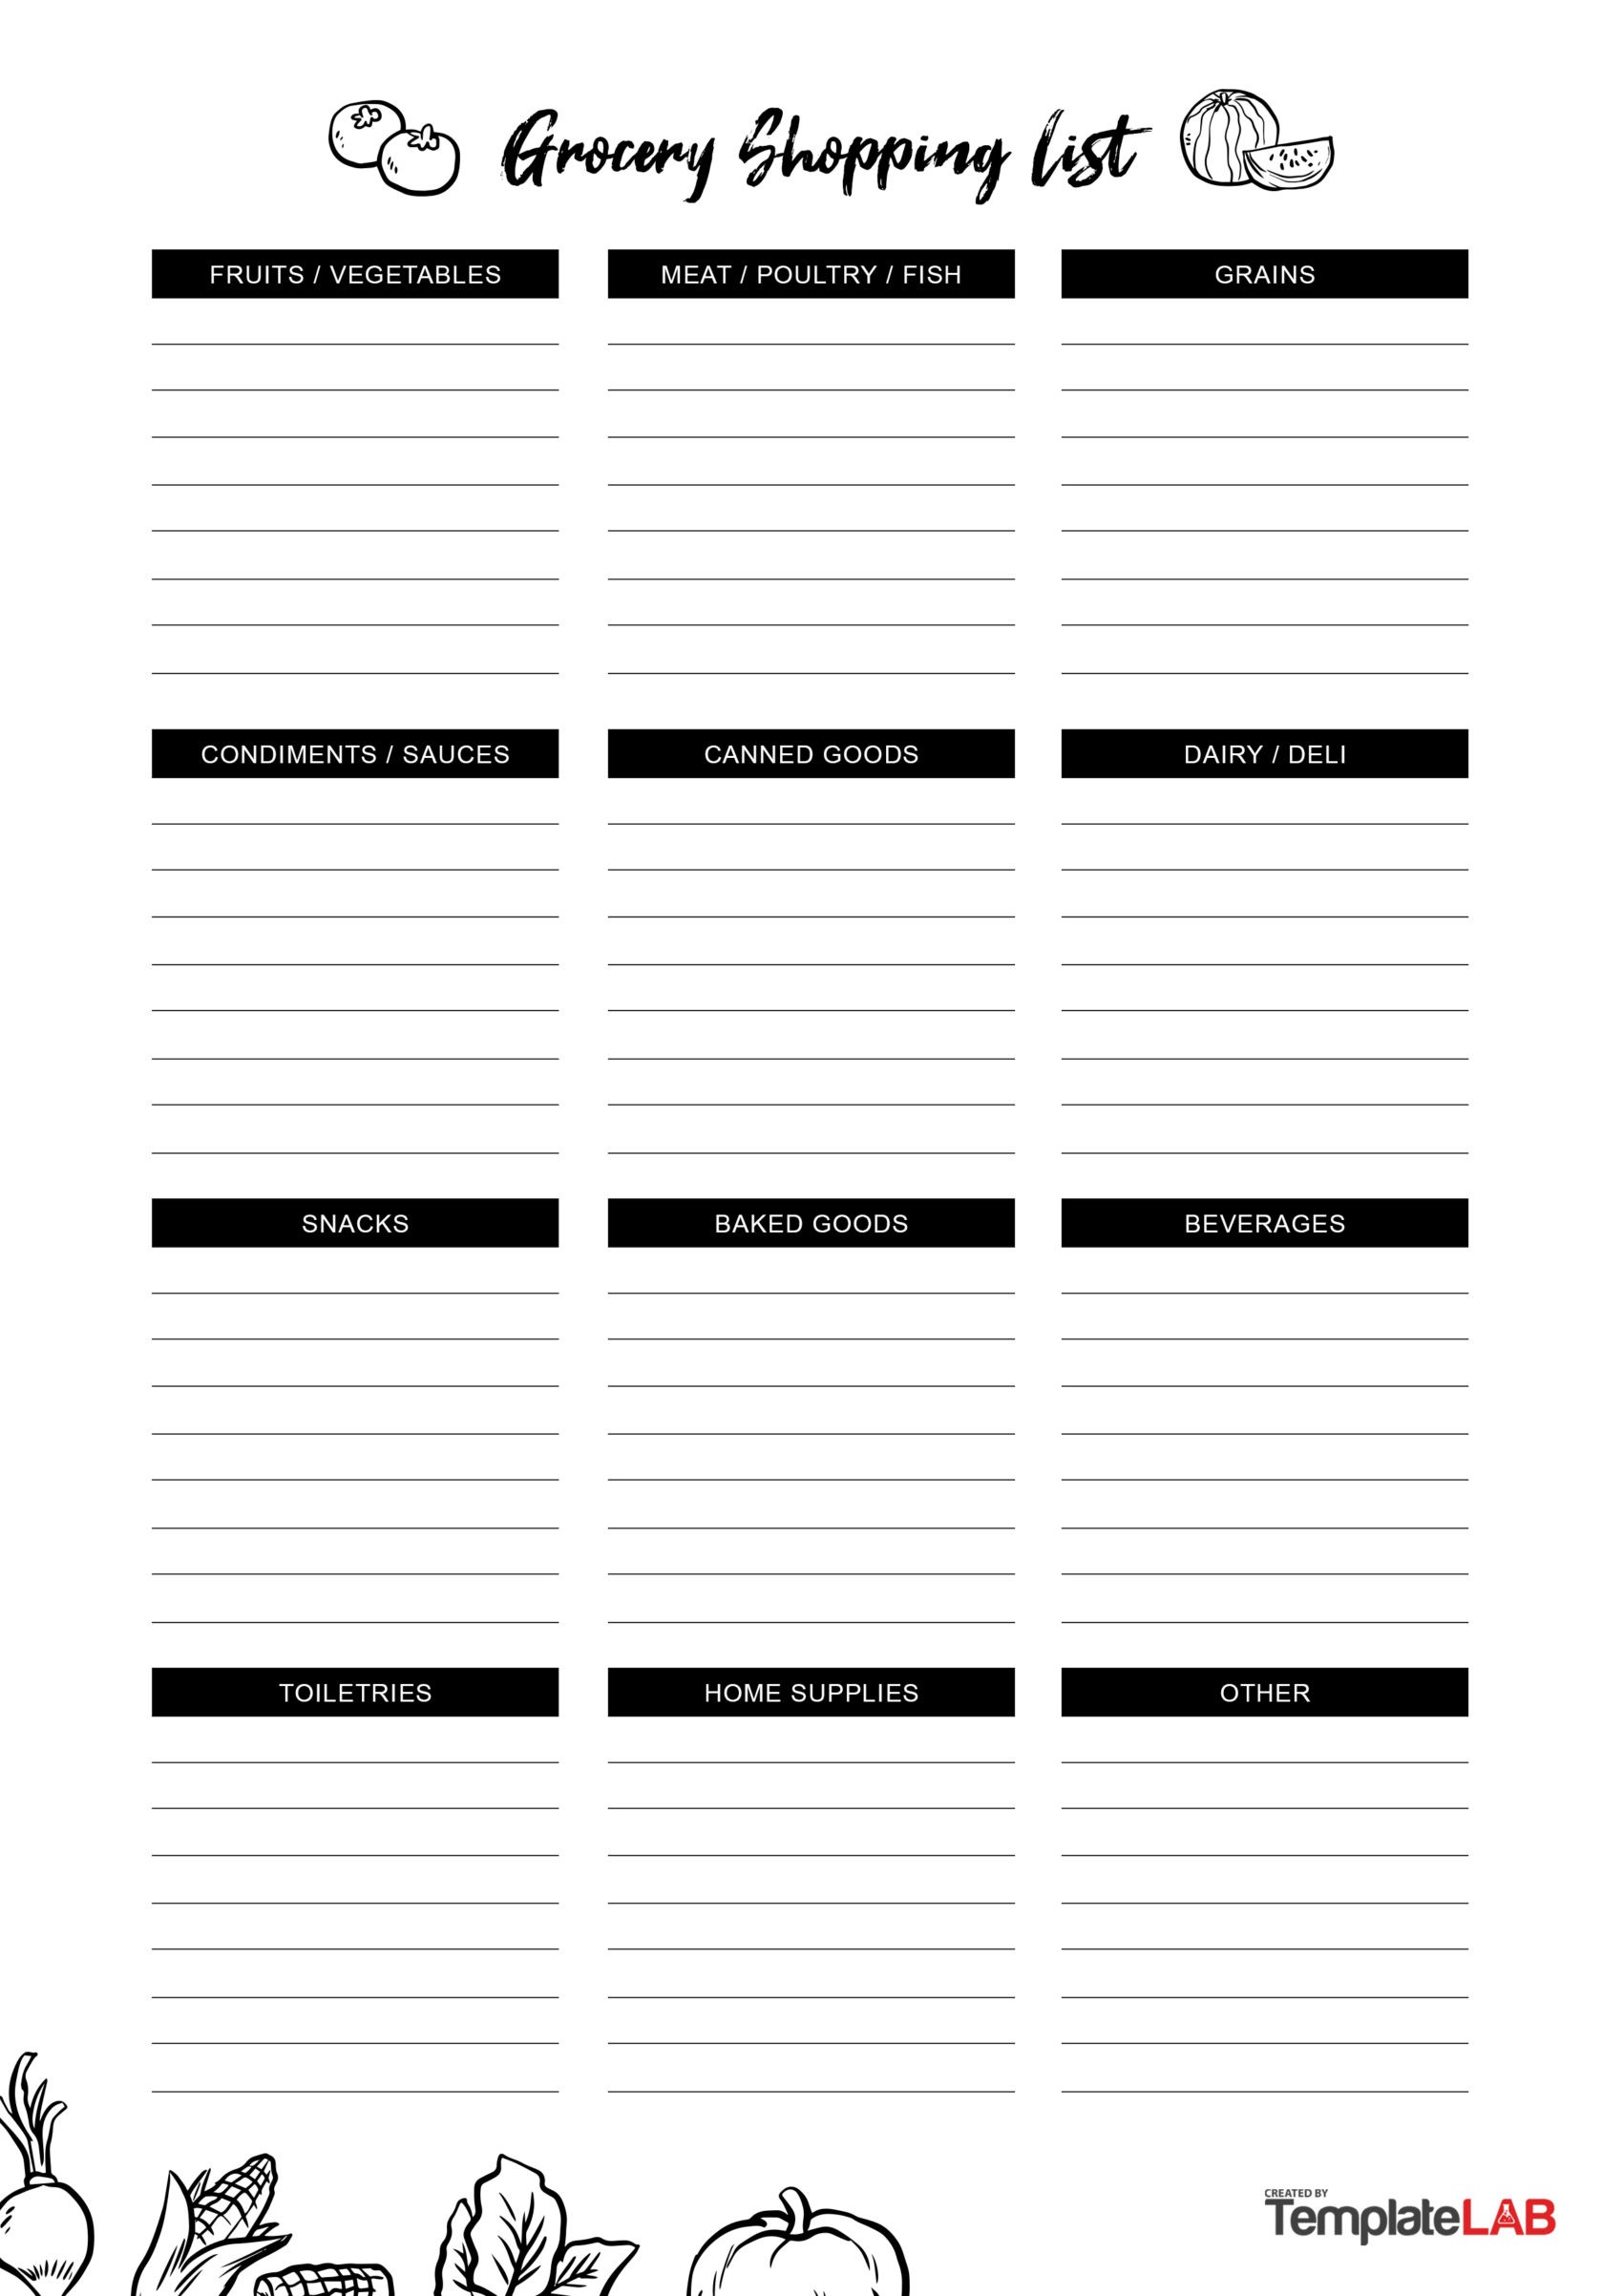 Grocery List By Aisle Template For Your Needs